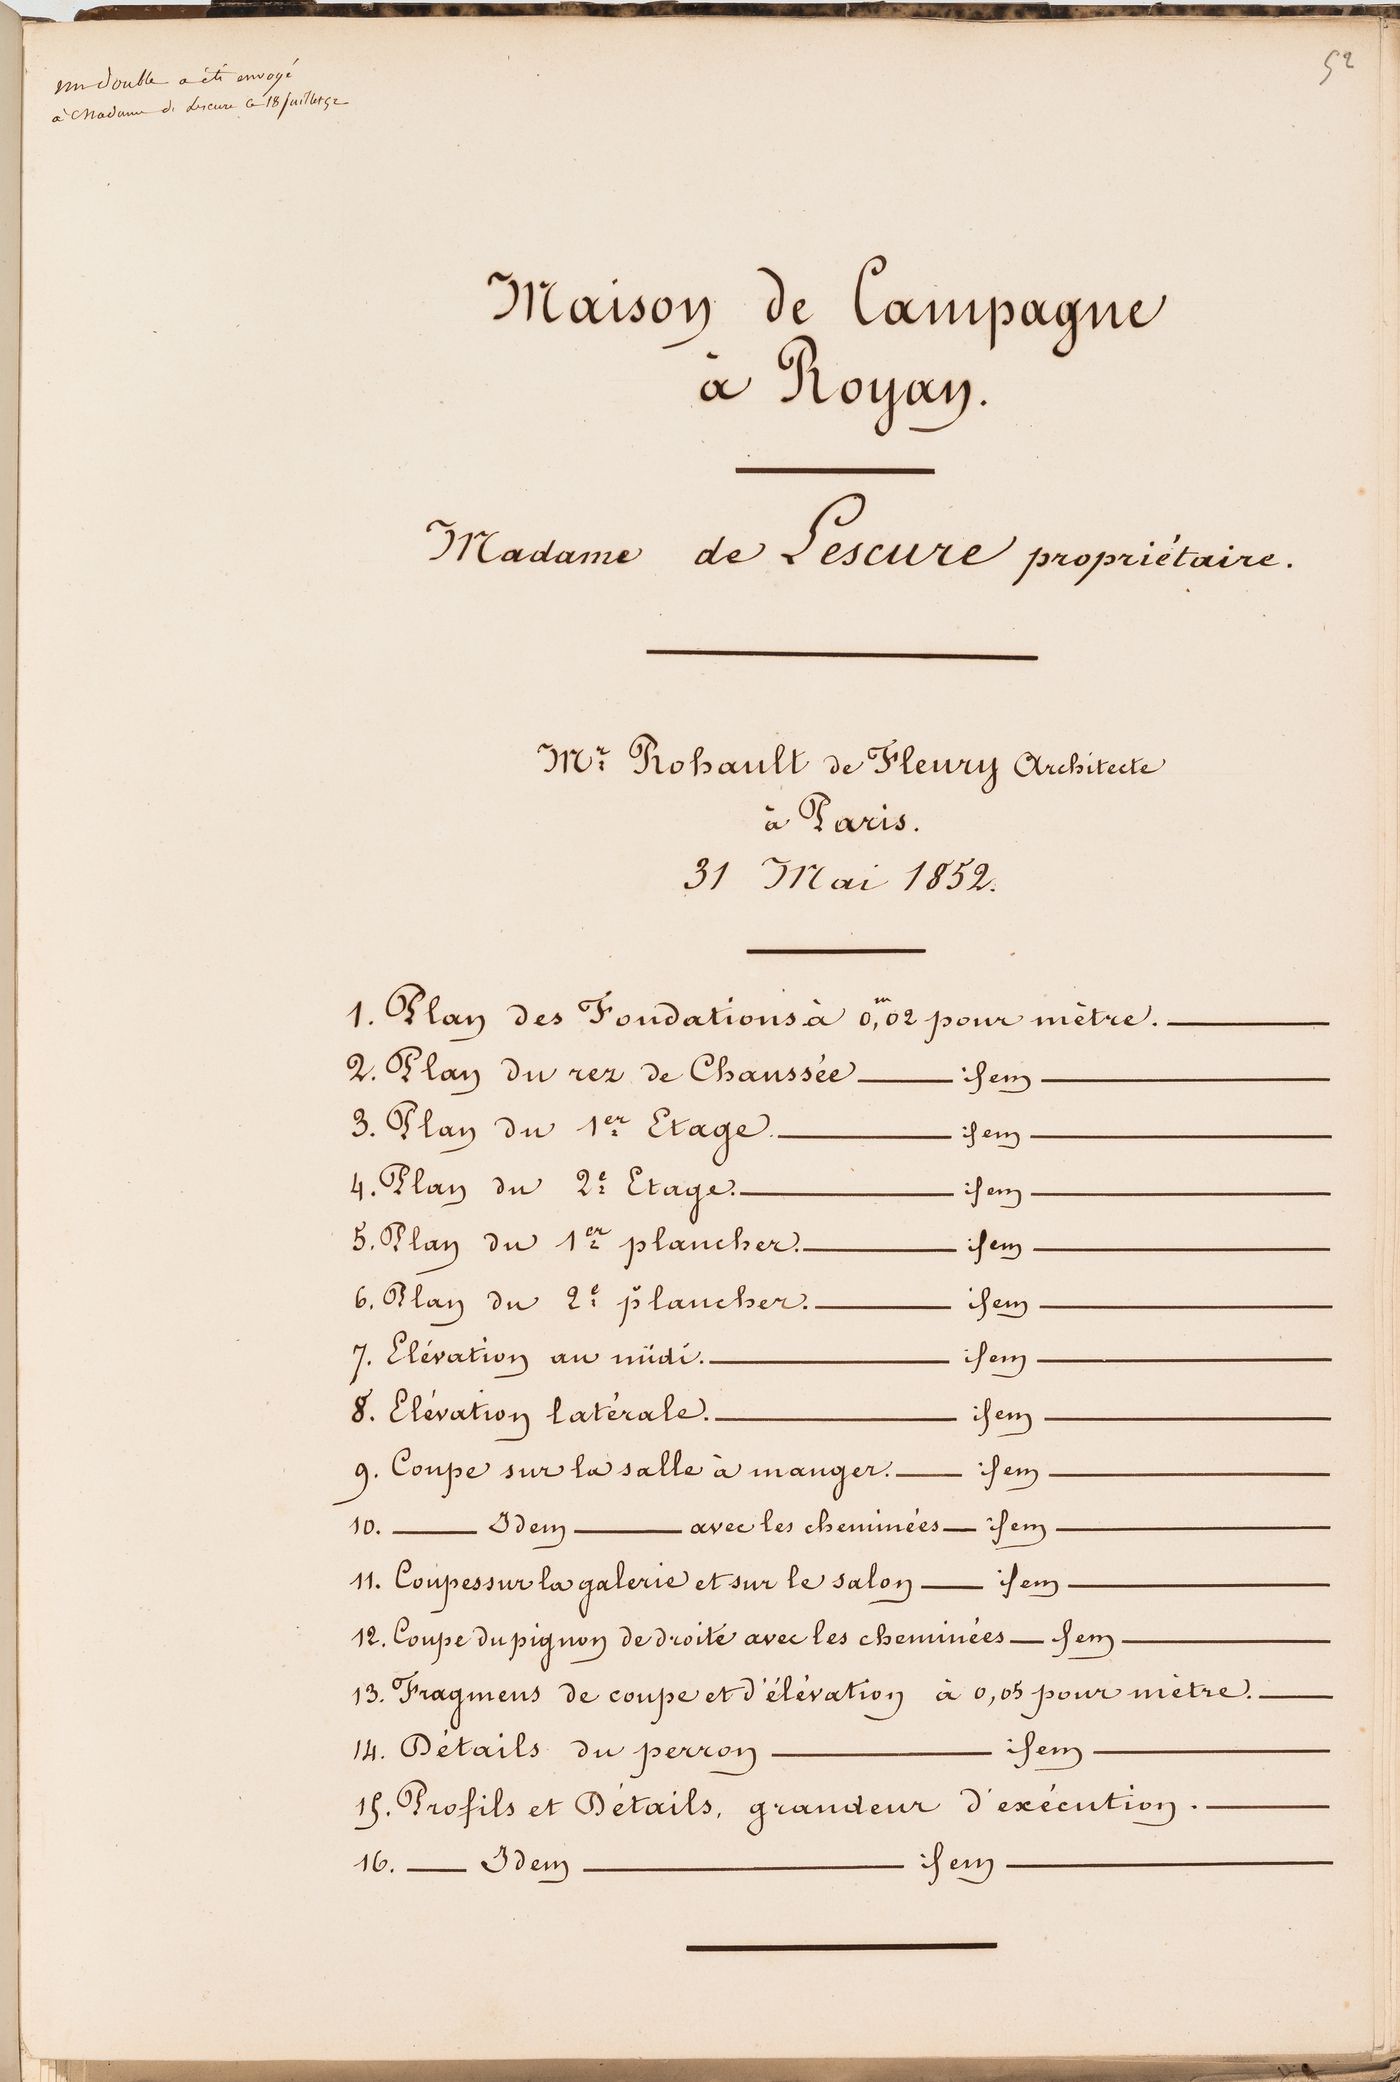 List of drawings for a country house for Madame de Lescure, Royan